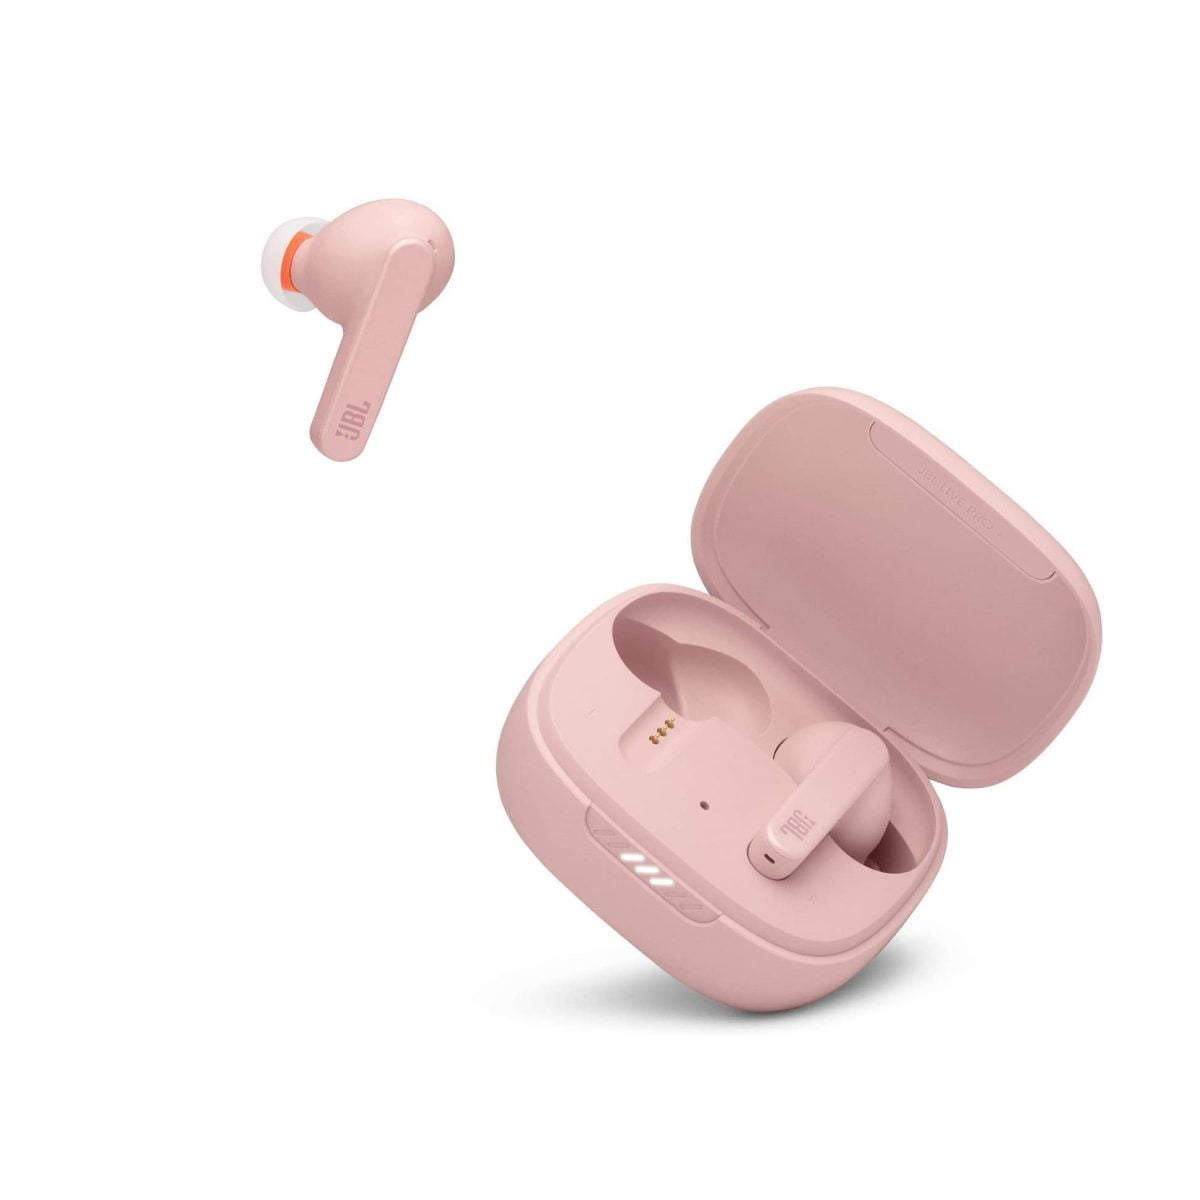 61B5Vr5Hw9L. Ac Sl1500 Jbl &Lt;H1&Gt;Jbl Live Pro Plus True Wireless Noise Cancelling Earbuds-Pink&Lt;/H1&Gt; Https://Www.youtube.com/Watch?V=Oan6Moxjv58 &Nbsp; The Best Audio Solution Not Matter The Device, Jbl Live Pro+ Tws Delivers An Immersive True Wireless Experience With Incredible Jbl Signature Sound. Let Smart Ambient Connect You To Your Environment, Or Focus On The Music With Adaptive Noise Cancelling. Then Switch Easily From Tunes To Group Calls With 4 Mics (2 Beamforming Mics Per Side) To Capture Your Voice With The Feeling Of Face-To-Face Conversation And A Third Mic For Environmental Noise Reduction. All Commands Are On The Earbuds, So You Can Manage Music And Calls With Your Finger Only. Jbl Earbuds Jbl Live Pro Plus Noise Cancelling Earbuds-Pink